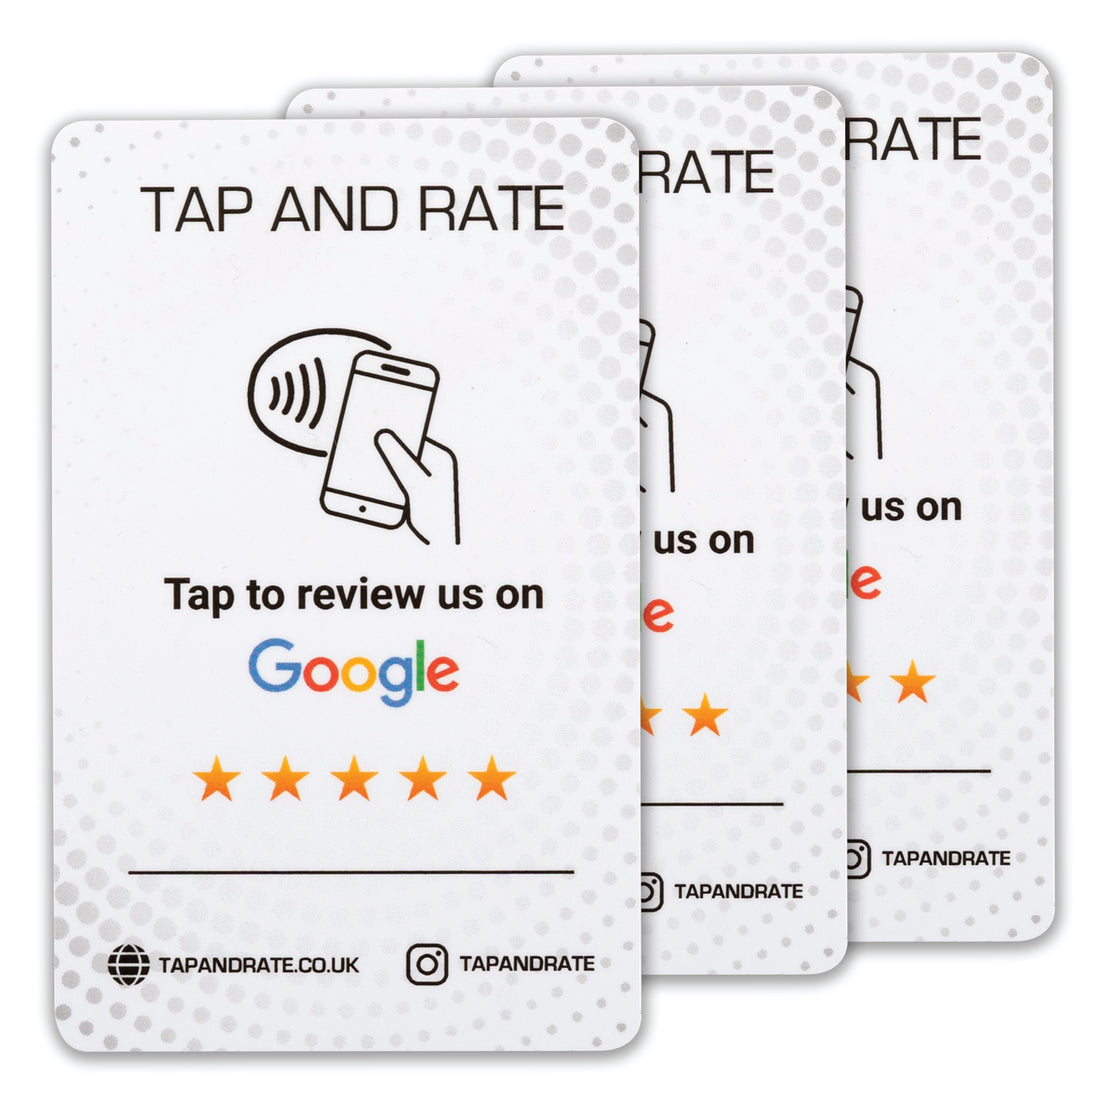 NFC Enabled Google review cards. Best chip, premium quality. Customers can leave you a google review with just one simple tap. No searching or finding your business, comes preprogramed to your business so all the customer has to do is tap their phone and leave a review. Ready to use out of the box! Start getting more 5 Star reviews today. Get more Customer with this simple to use product. Tap and Rate